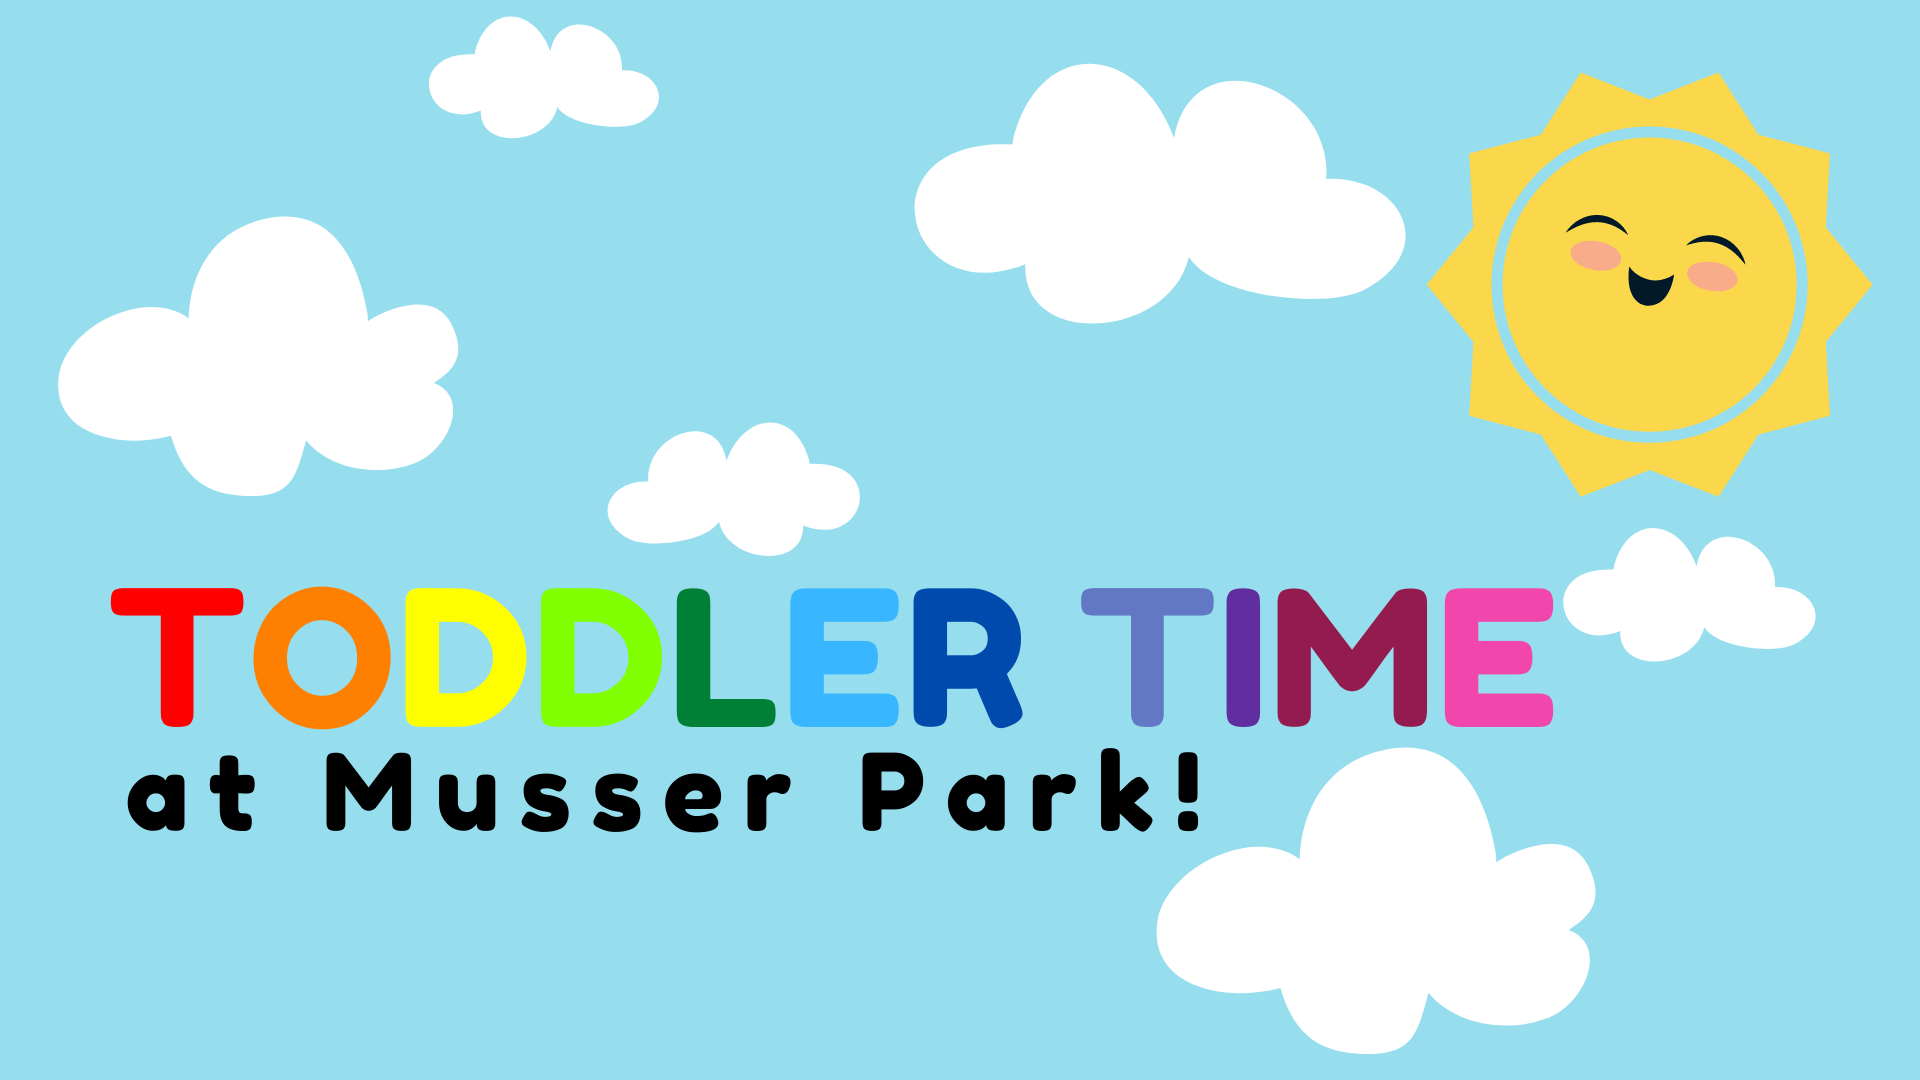 Graphic of clouds and sun fill the background with the words Toddler Time at Musser Park in the foreground